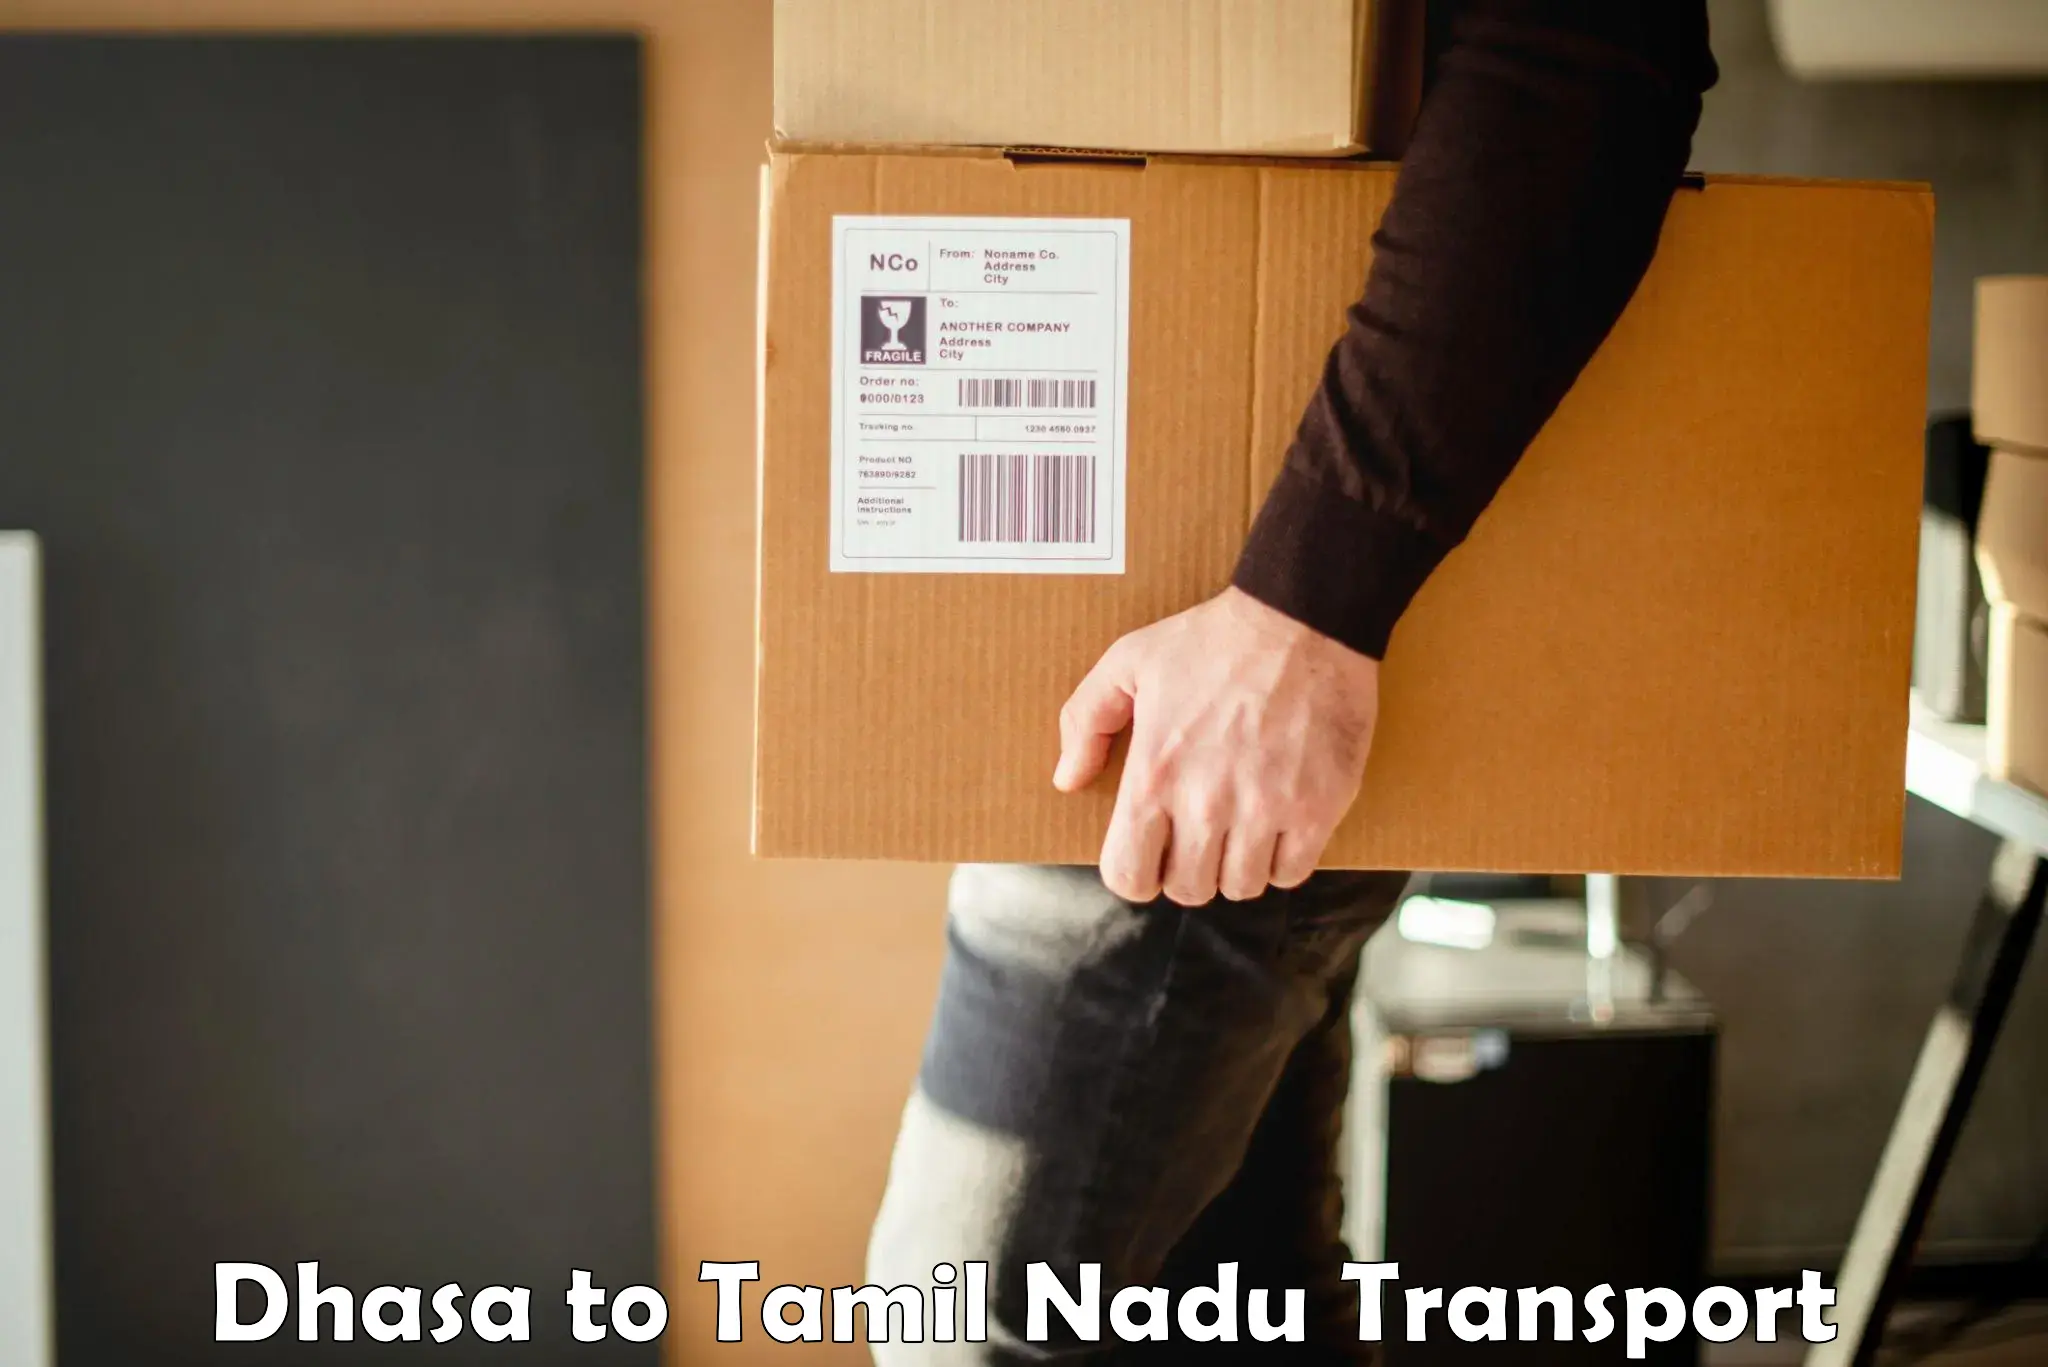 Truck transport companies in India Dhasa to Ennore Port Chennai